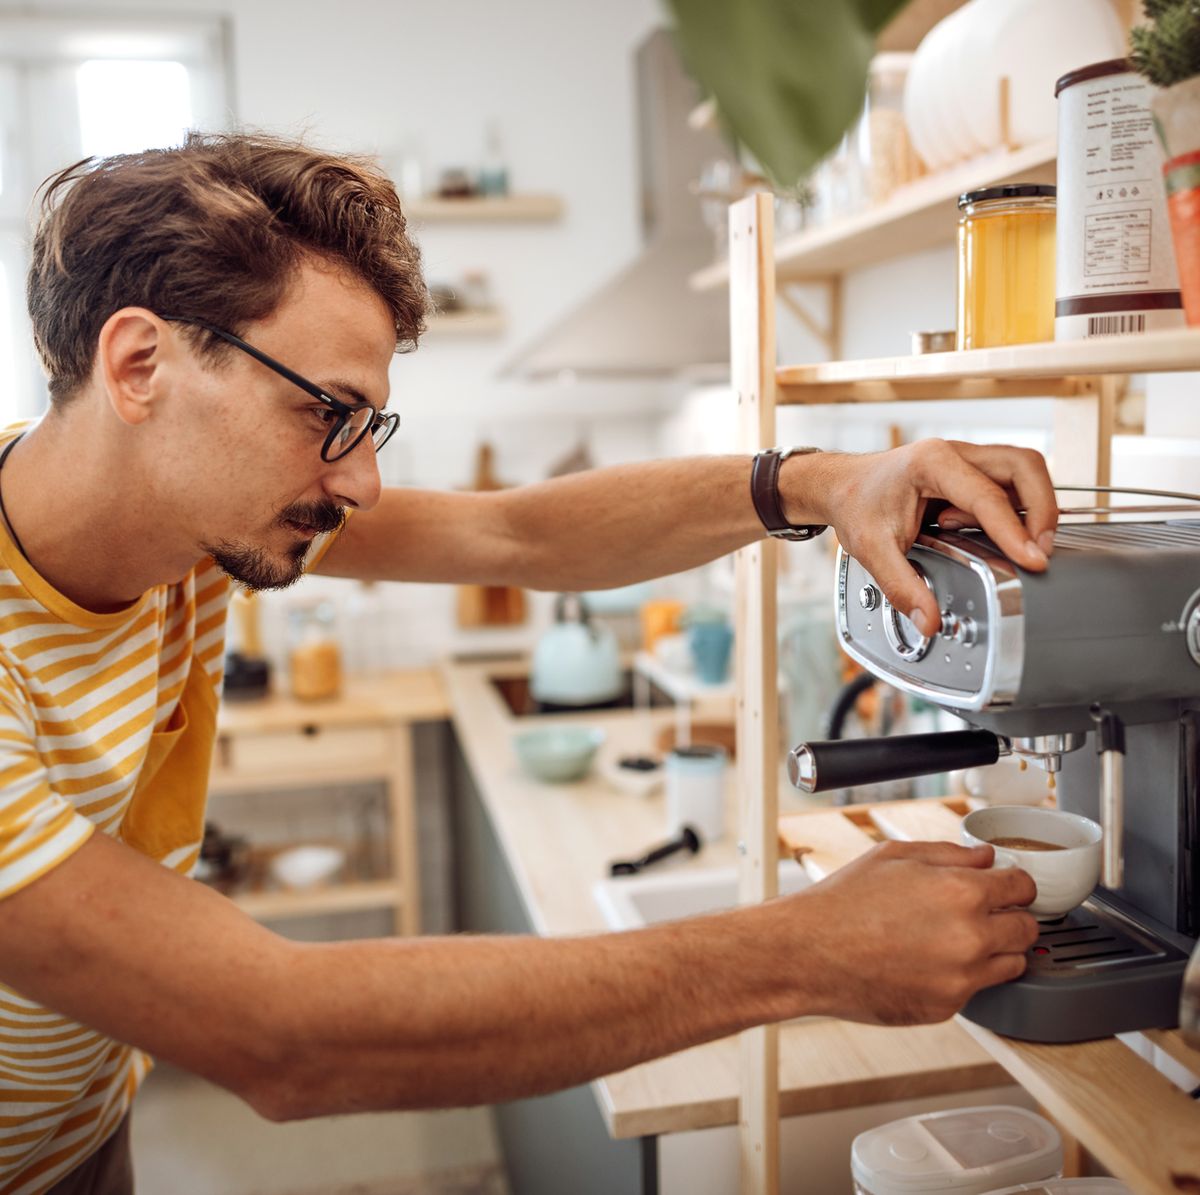 Best Coffee Makers In 2023 For Easy Homemade Lattes And Espresso